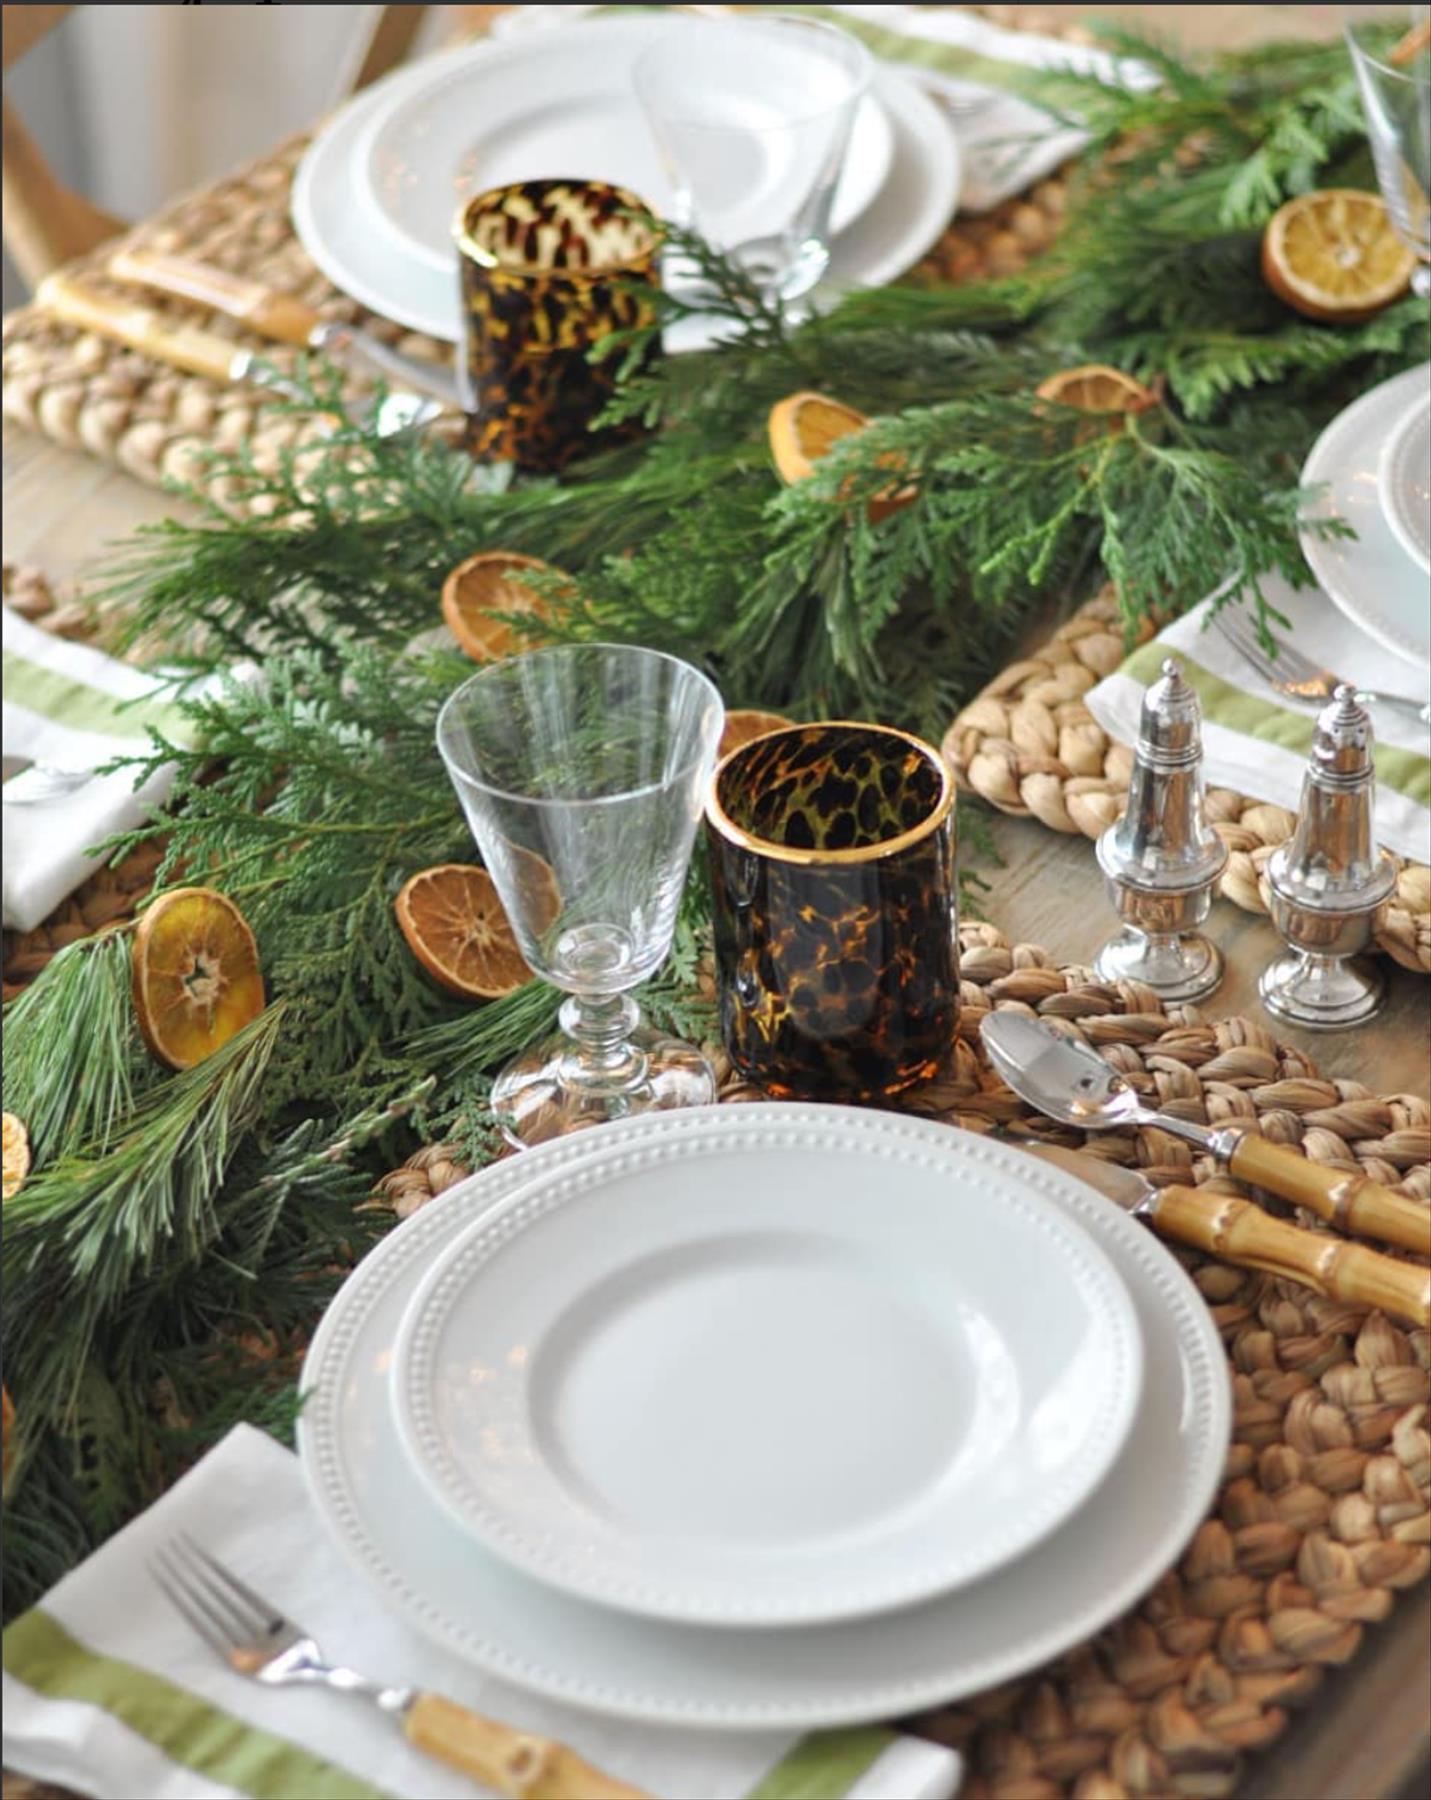 Merry Christmas Table Setting Ideas for Holiday Cheer